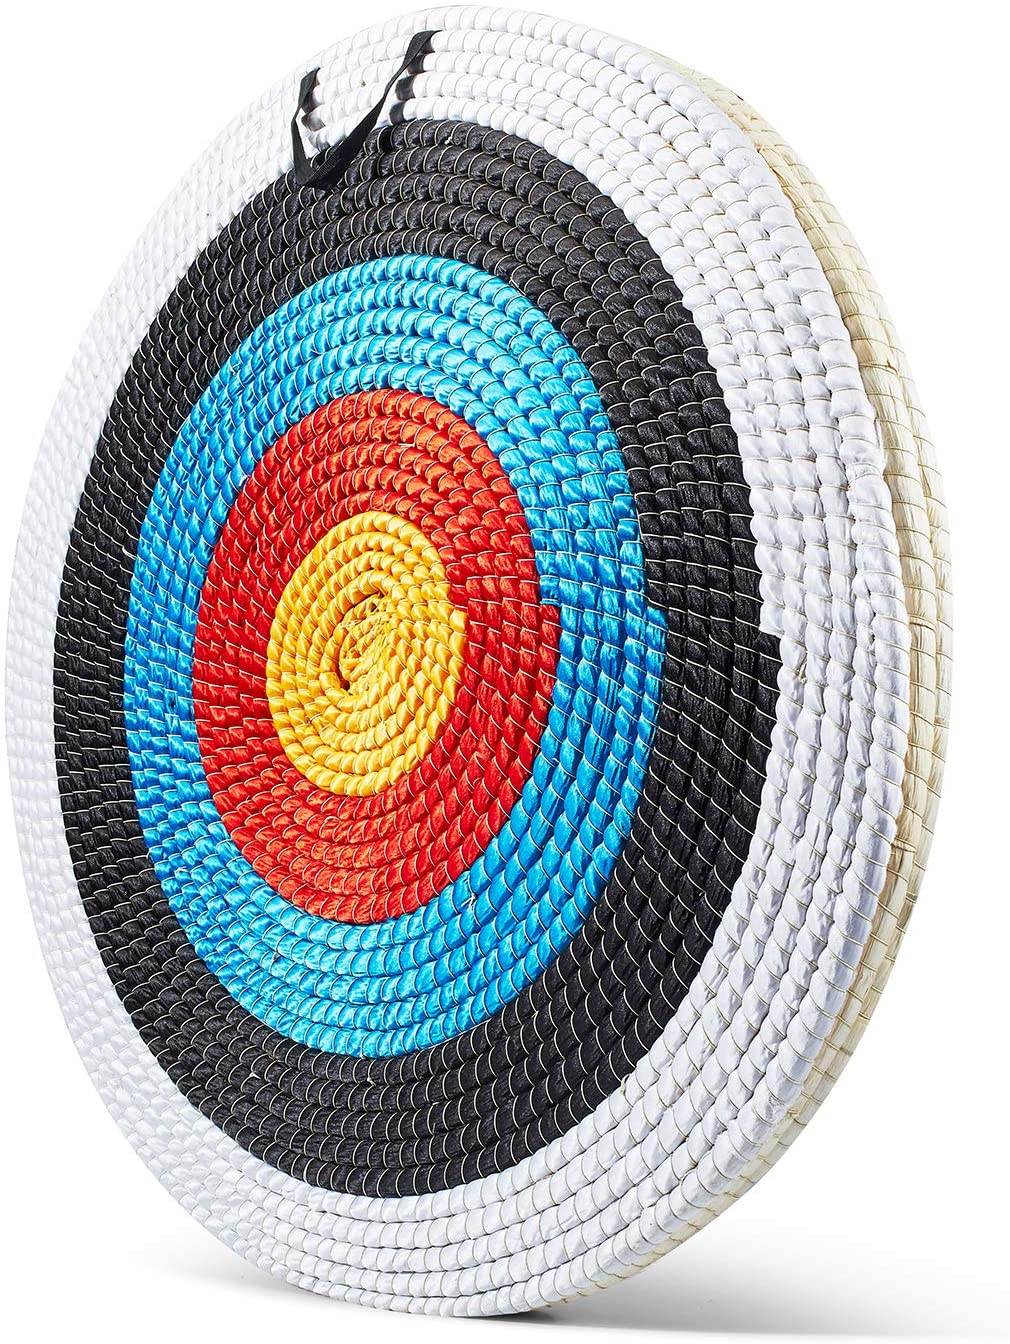 Archery Target Traditional Hand-Made Straw Arrow Target For Recurve Bow Longbow or Compound Bow